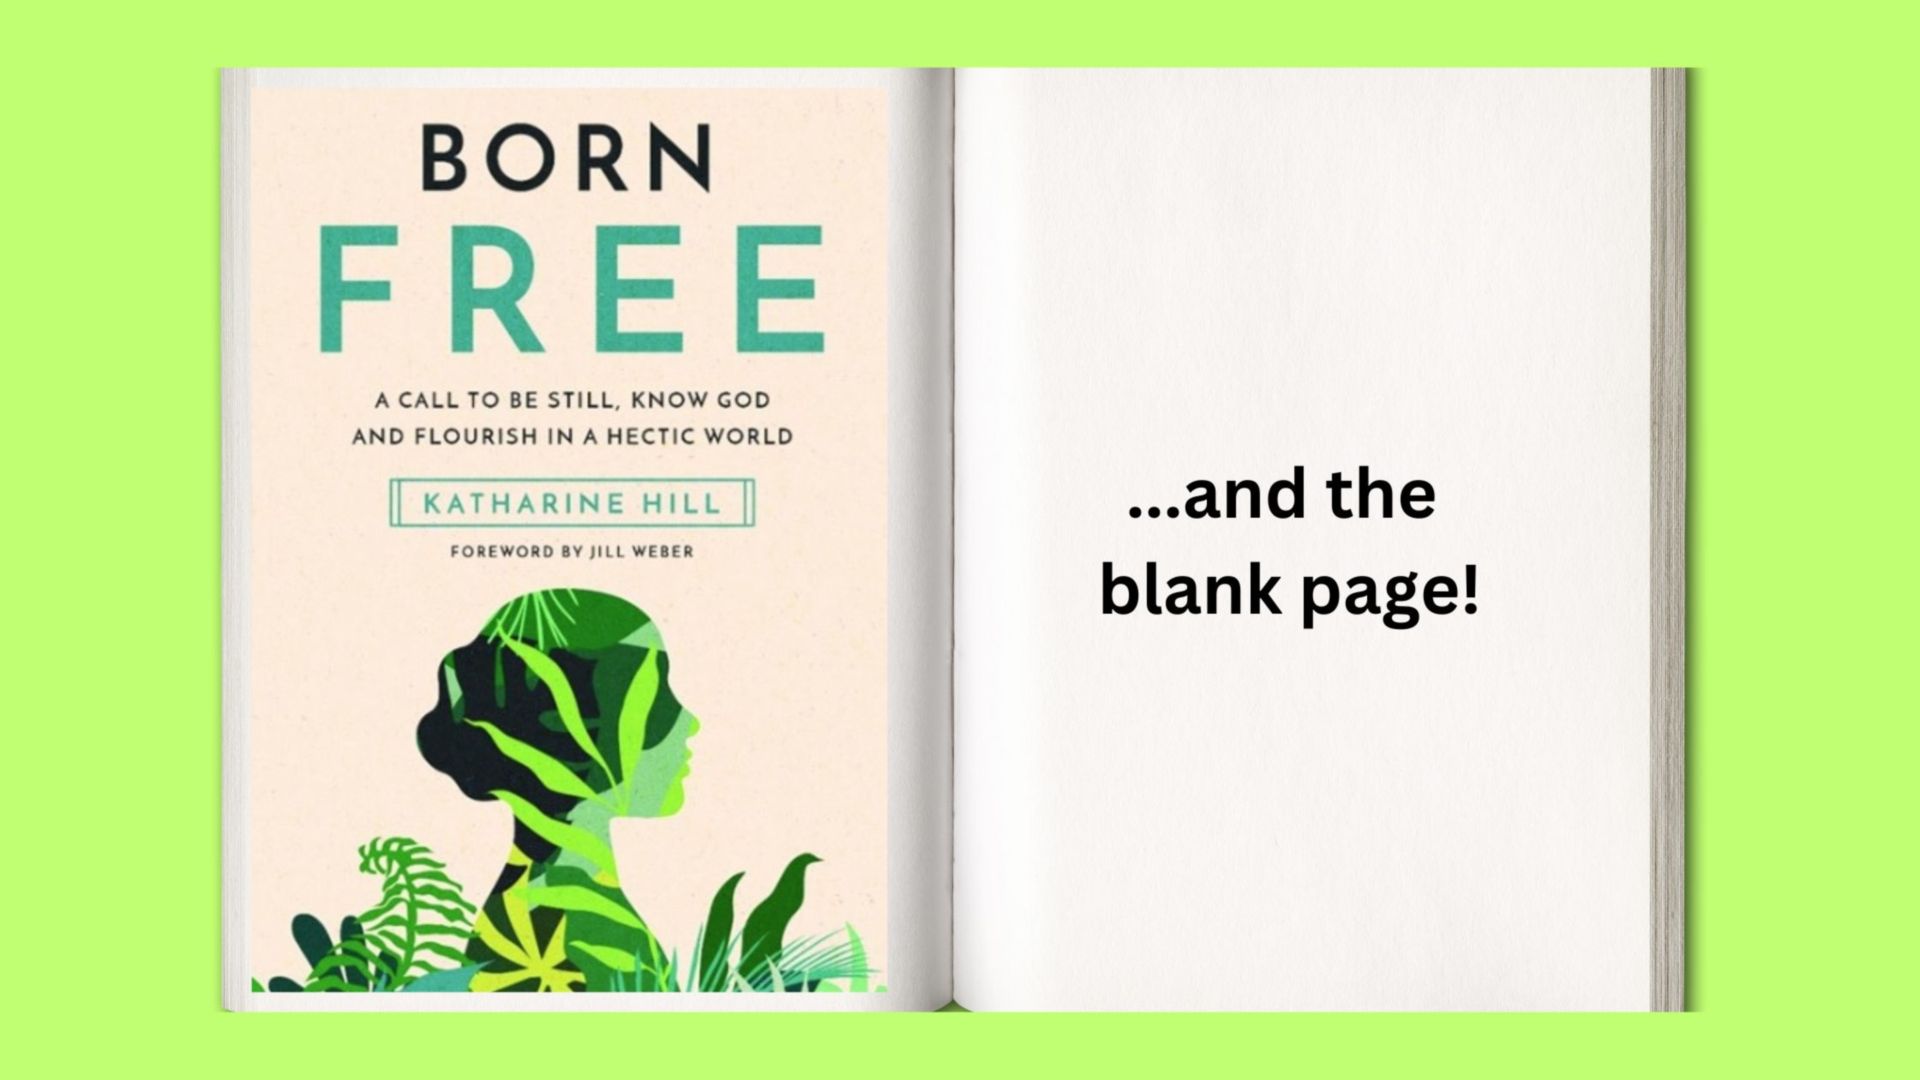 A story from the publishers of Katharine Hill's book 'Born Free'